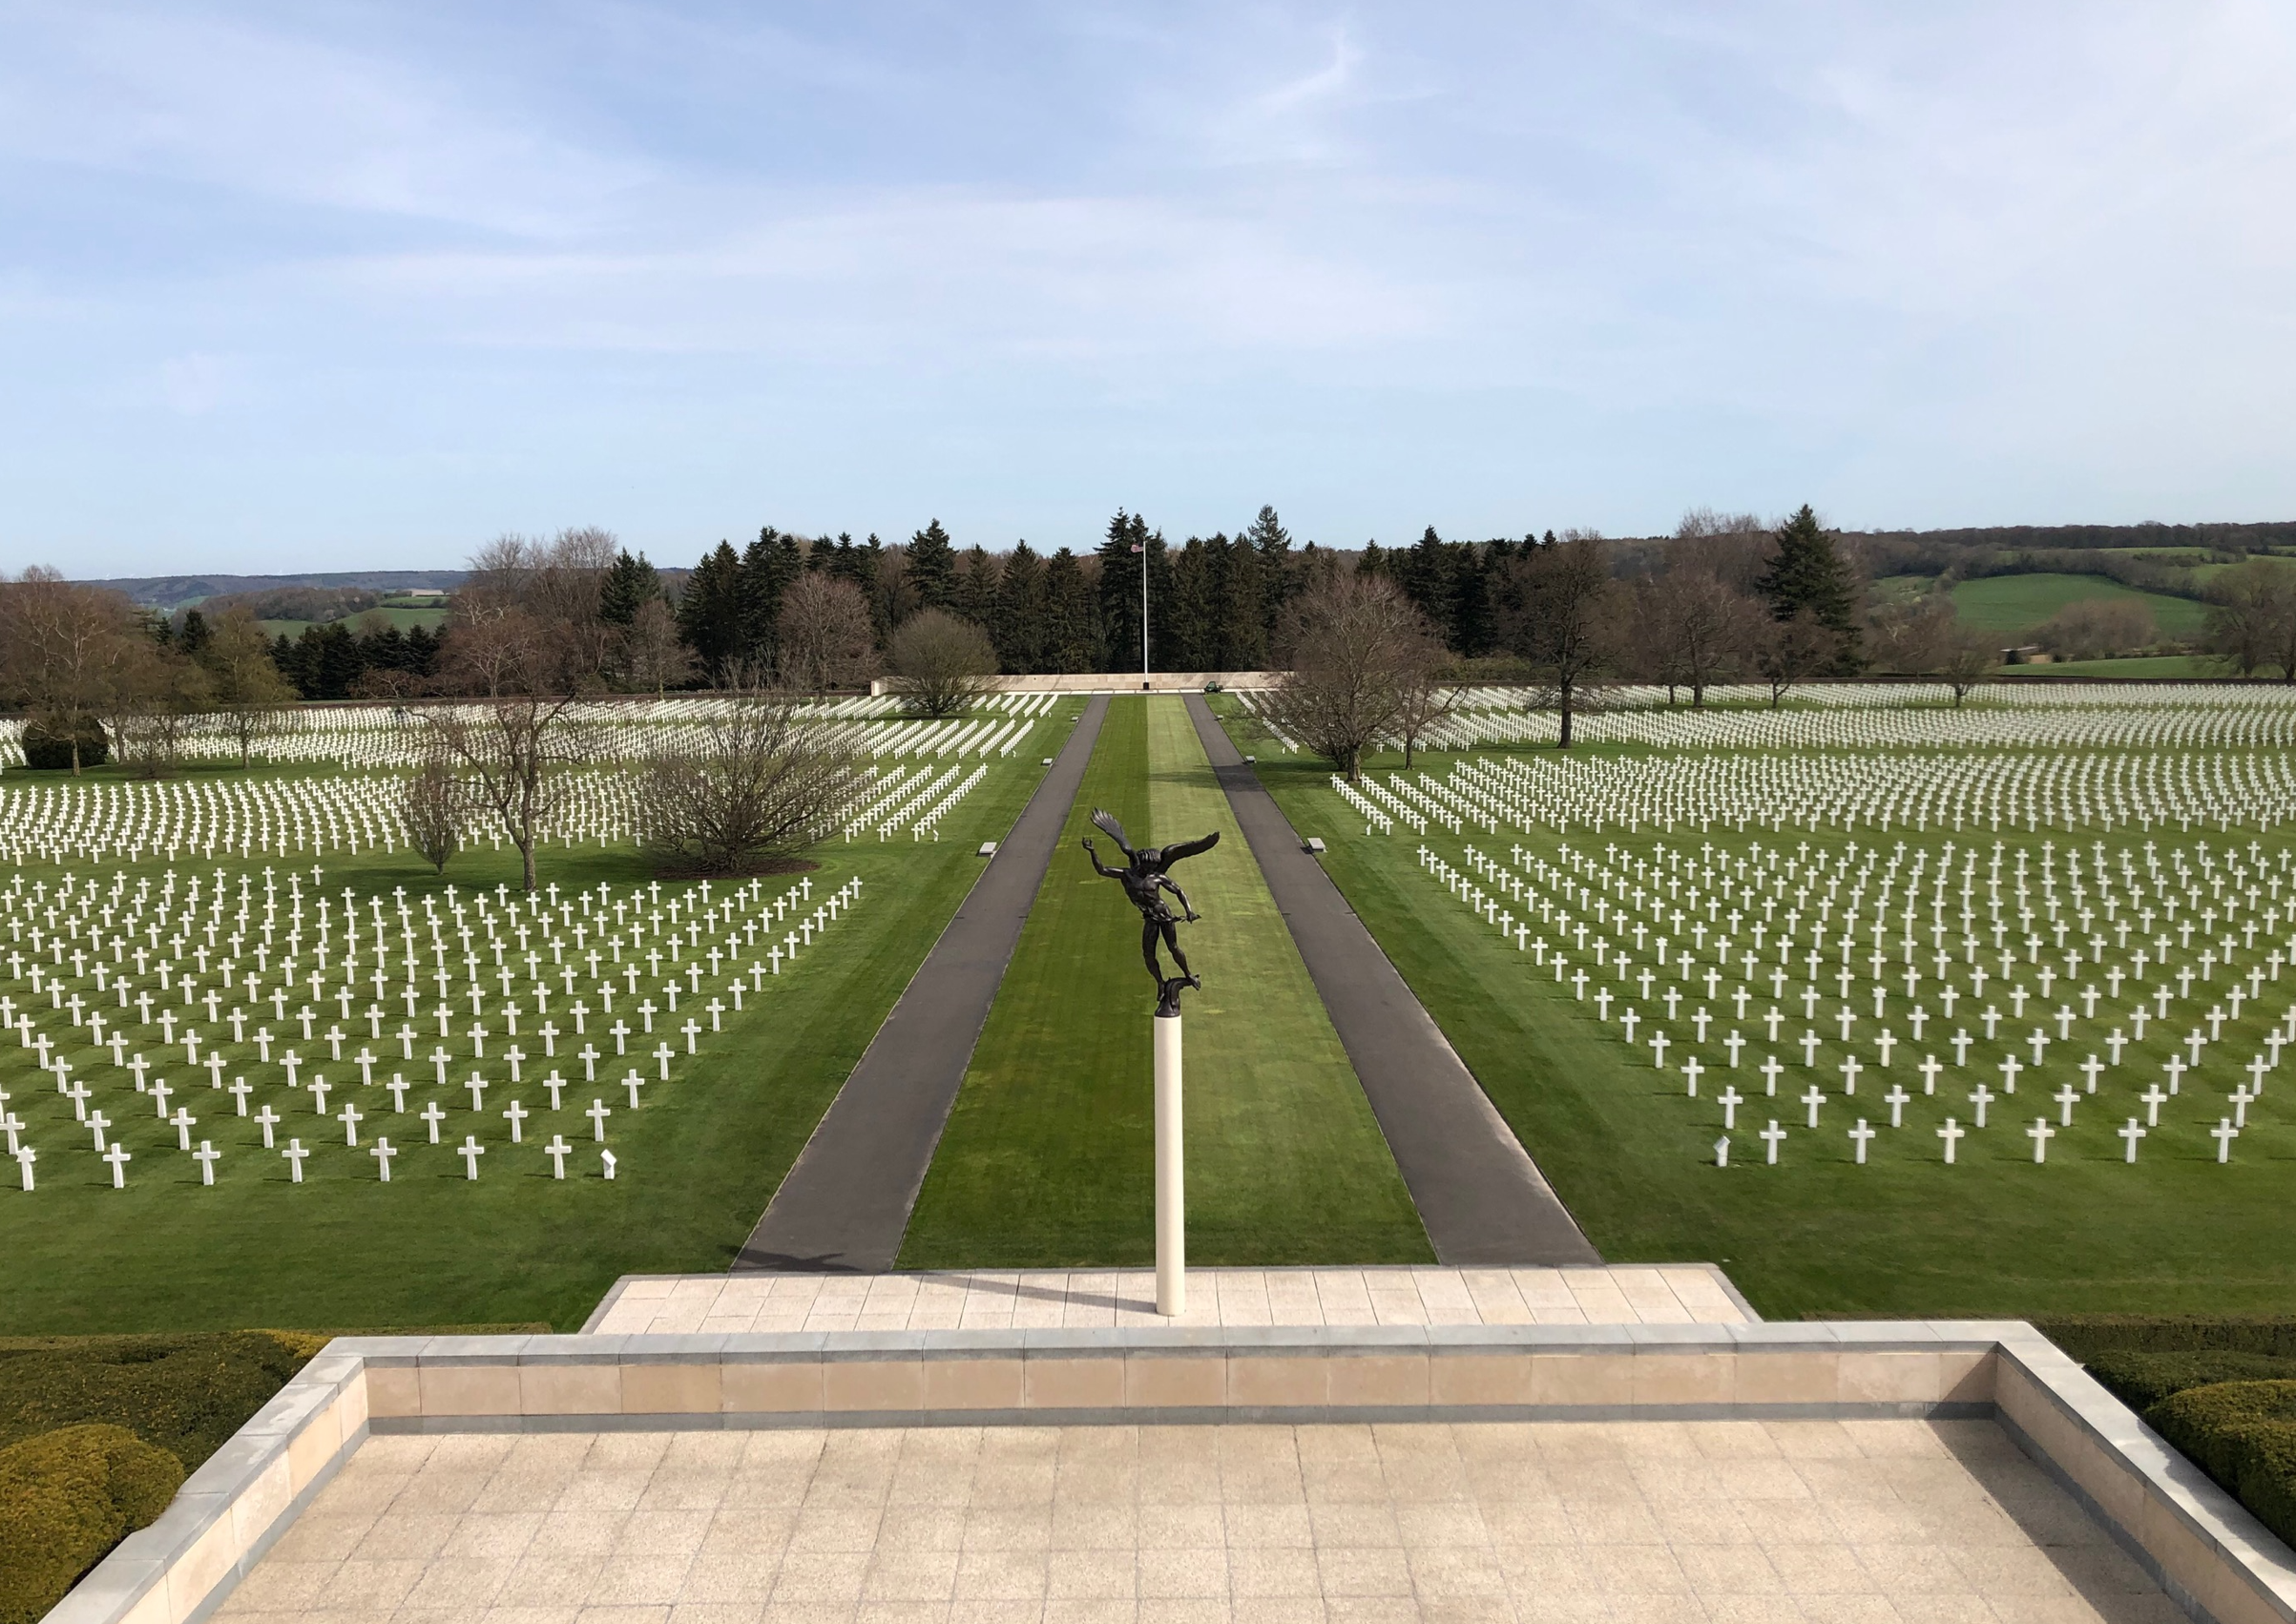 Henri-Chapelle American Cemetery seen from above. Credits: American Battle Monuments Commission.